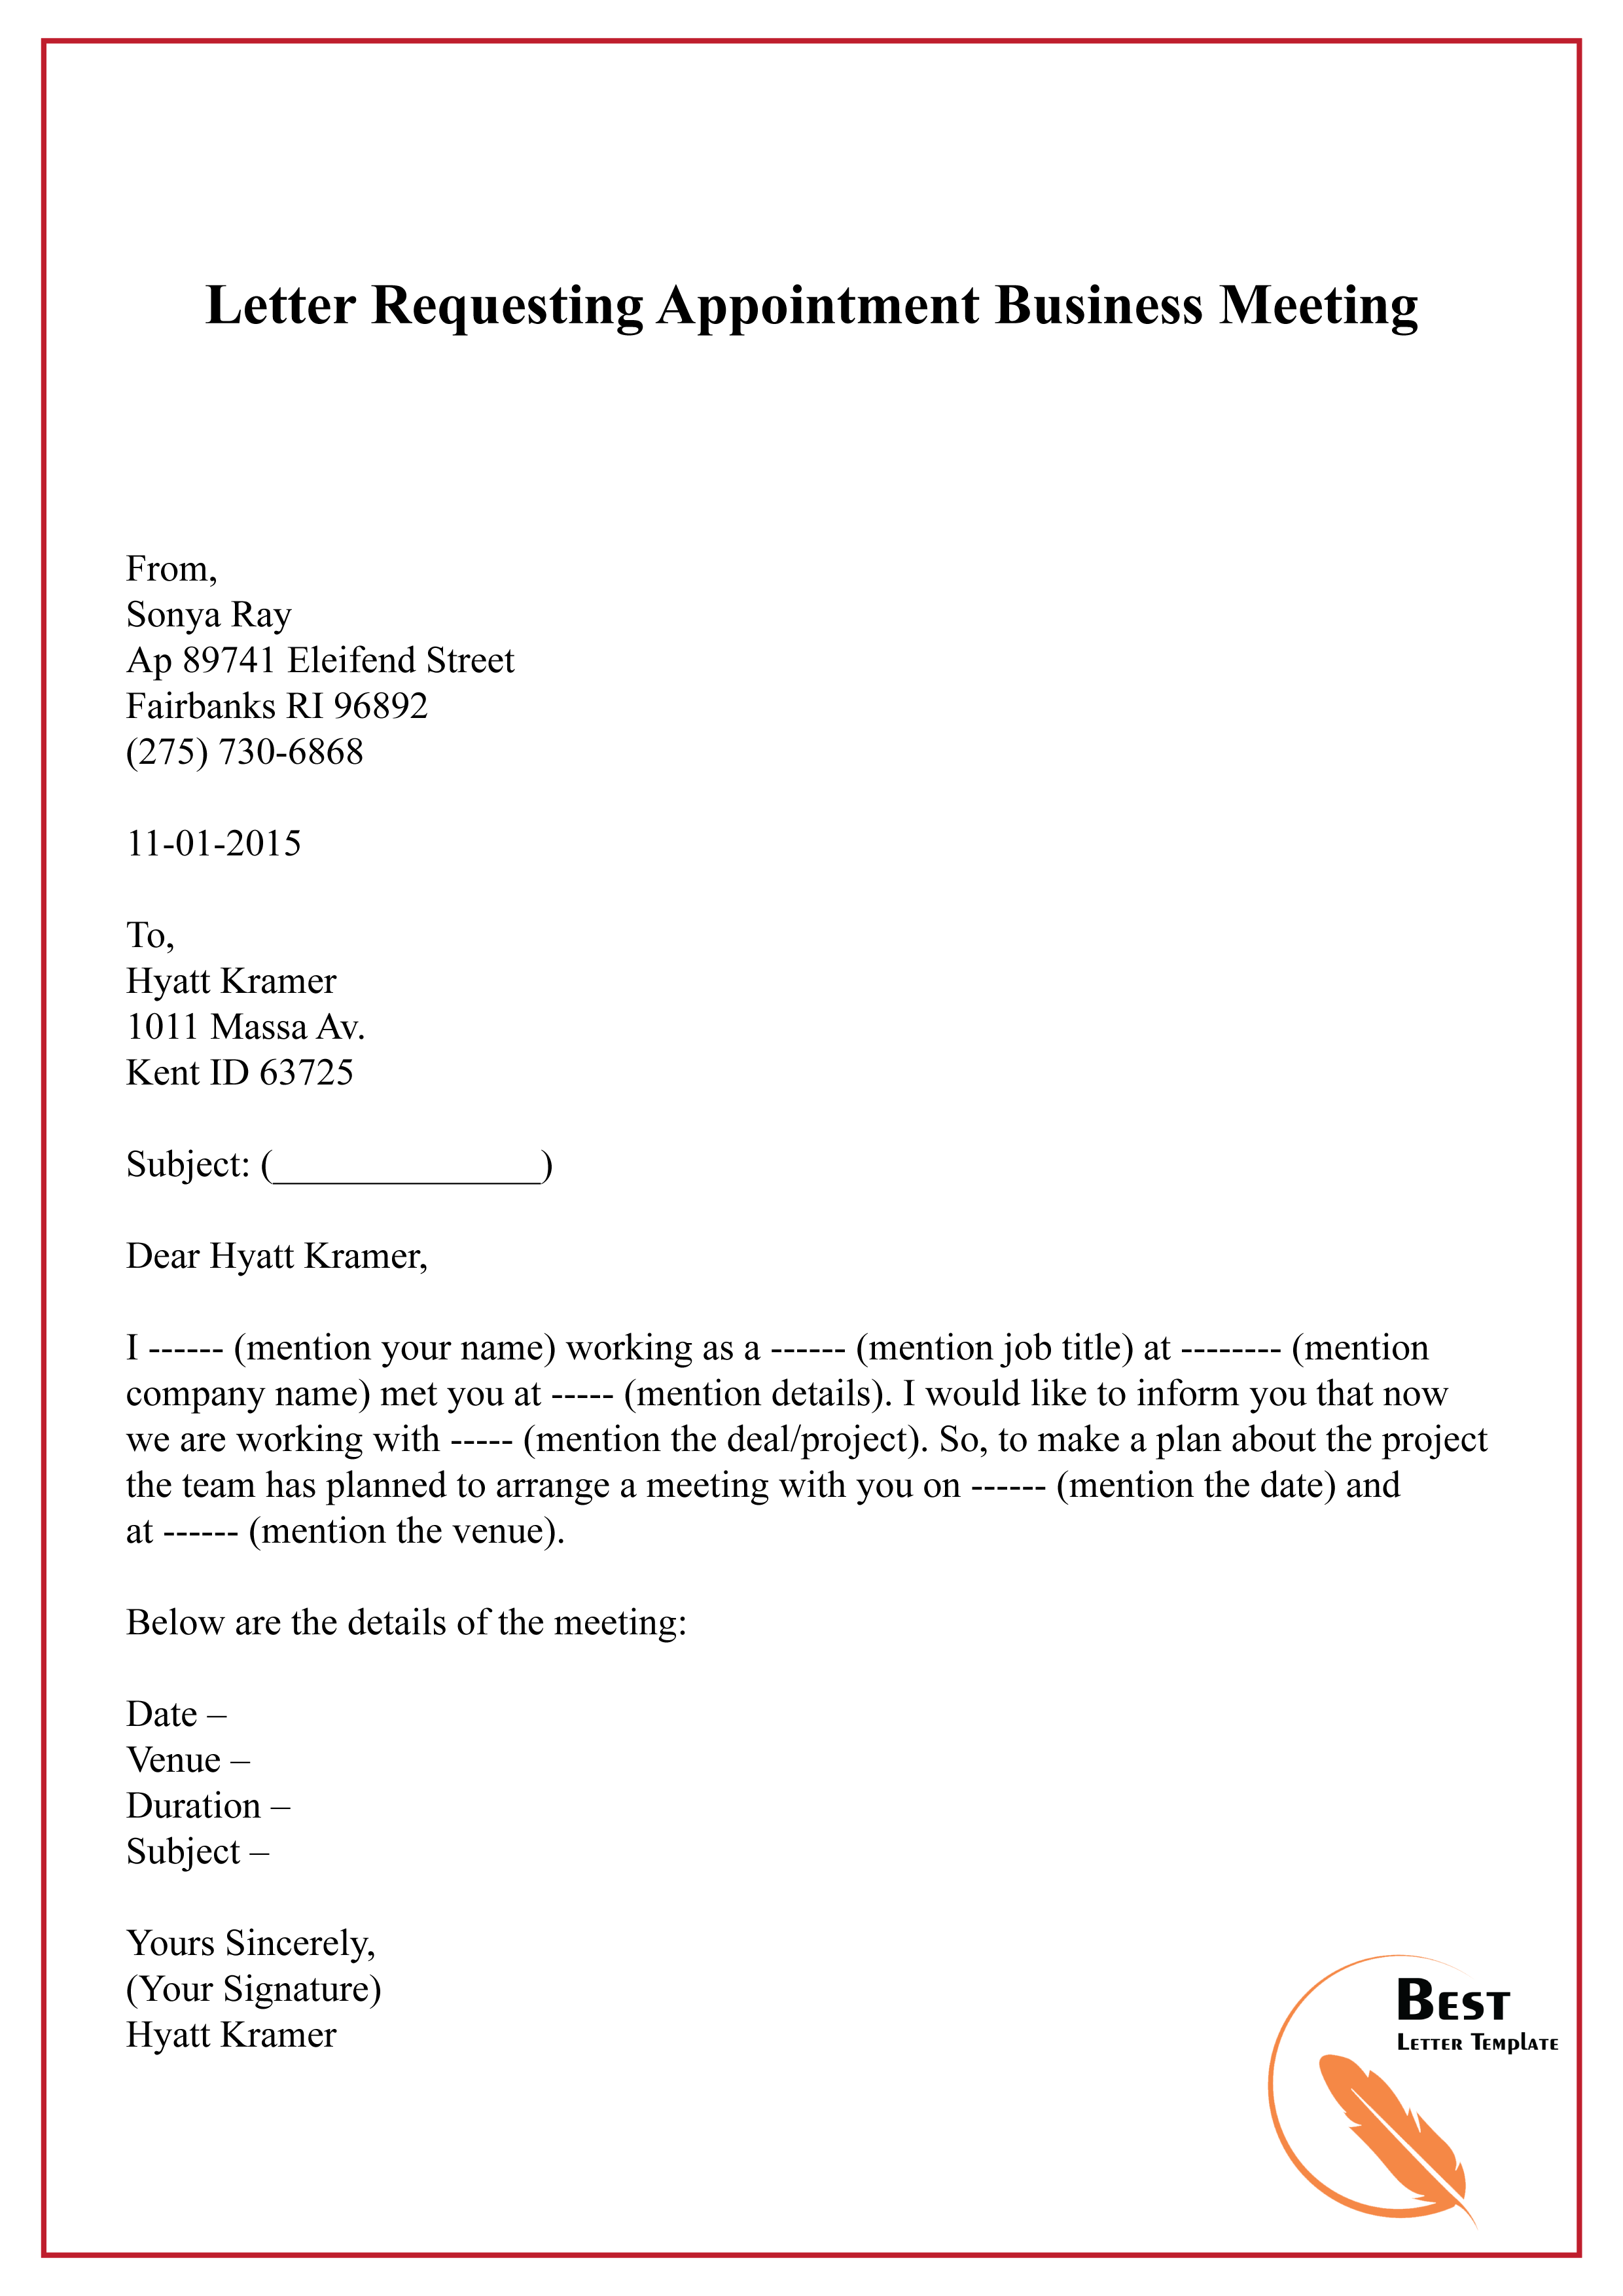 application letter for seeking appointment